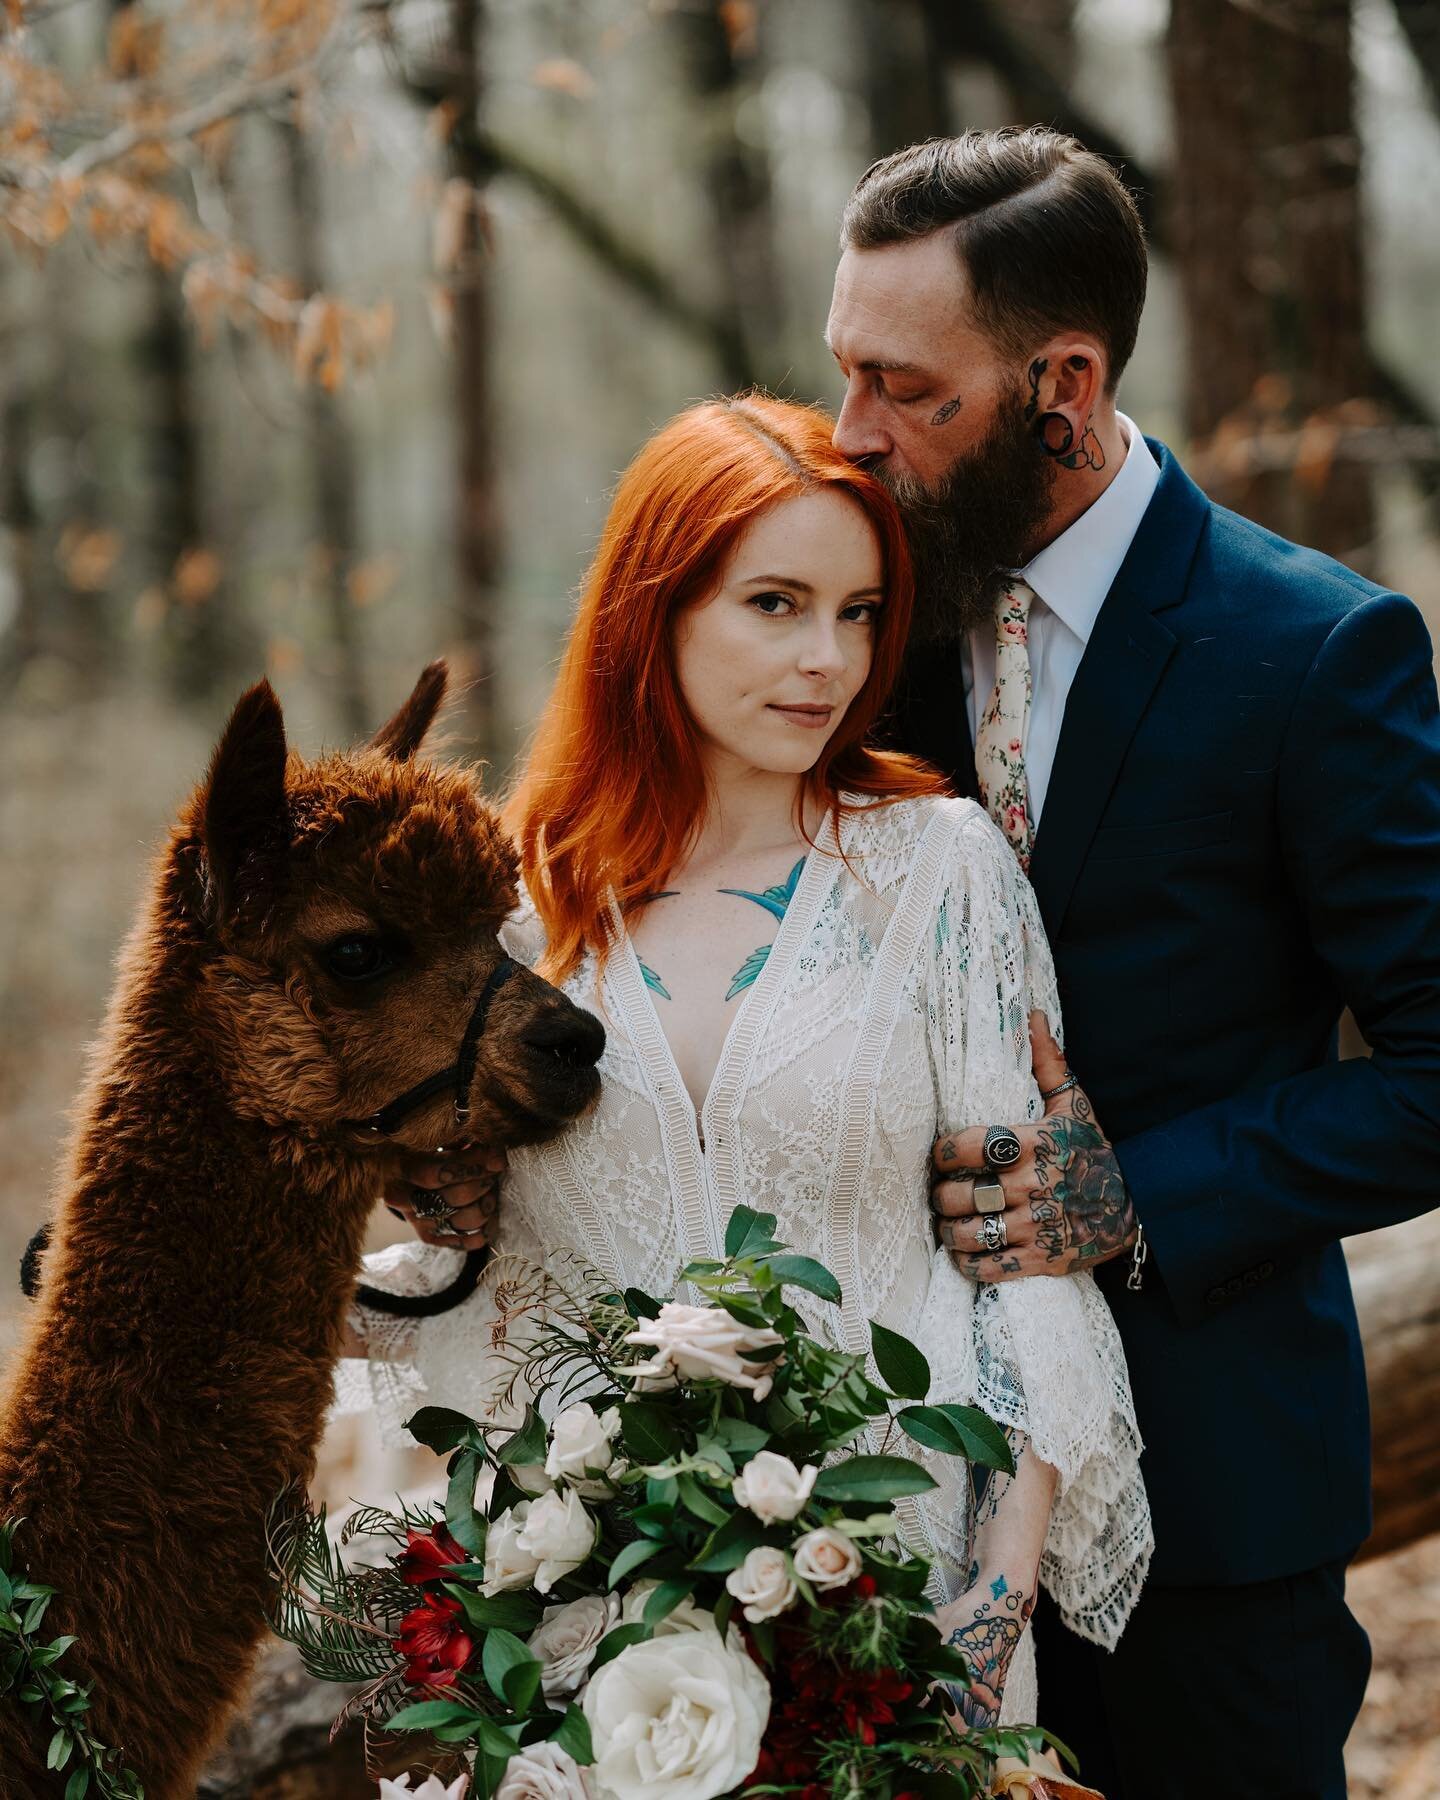 Can I just say if you&rsquo;re looking to add something unique fluffy and adorable to your small wedding or elopement I highly recommend alpacas! They are the sweetest creatures ever and make for some really cute photos! 😍
.
Planning / styling: @mar